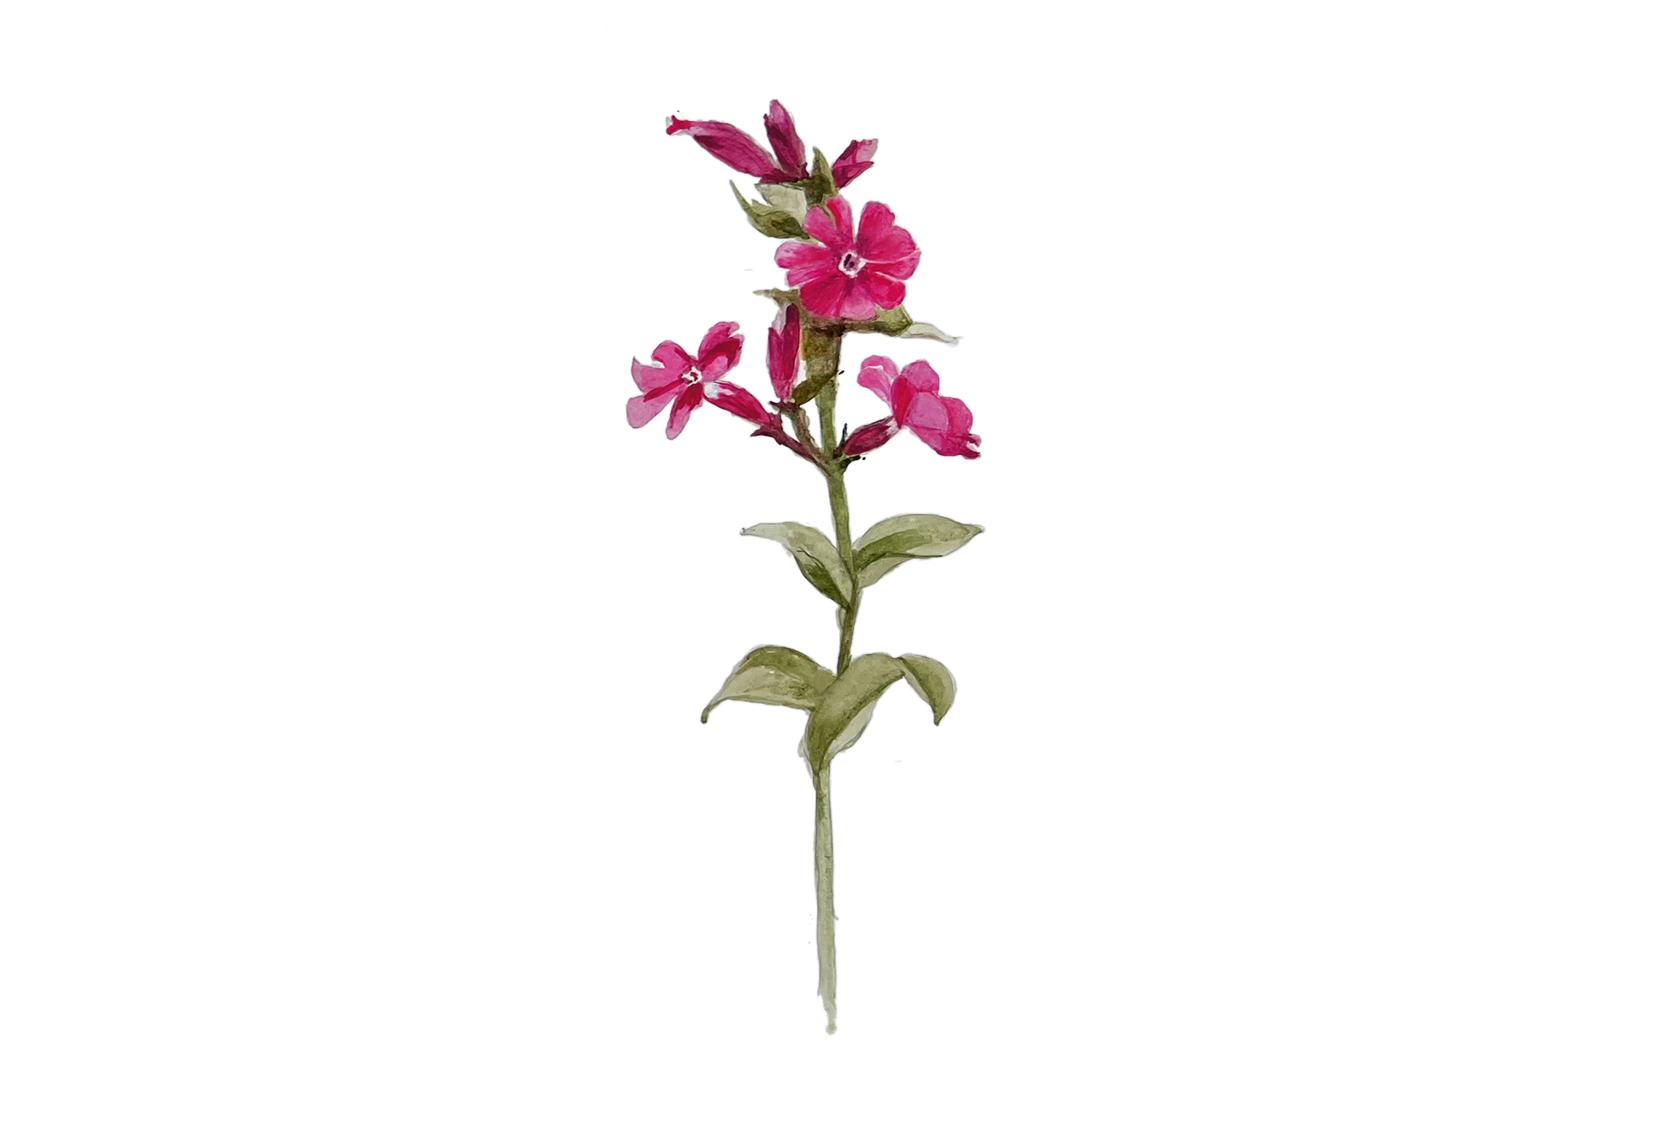 Watercolour illustration of a stem of Red Campion with three small magenta flowers and 3 buds.